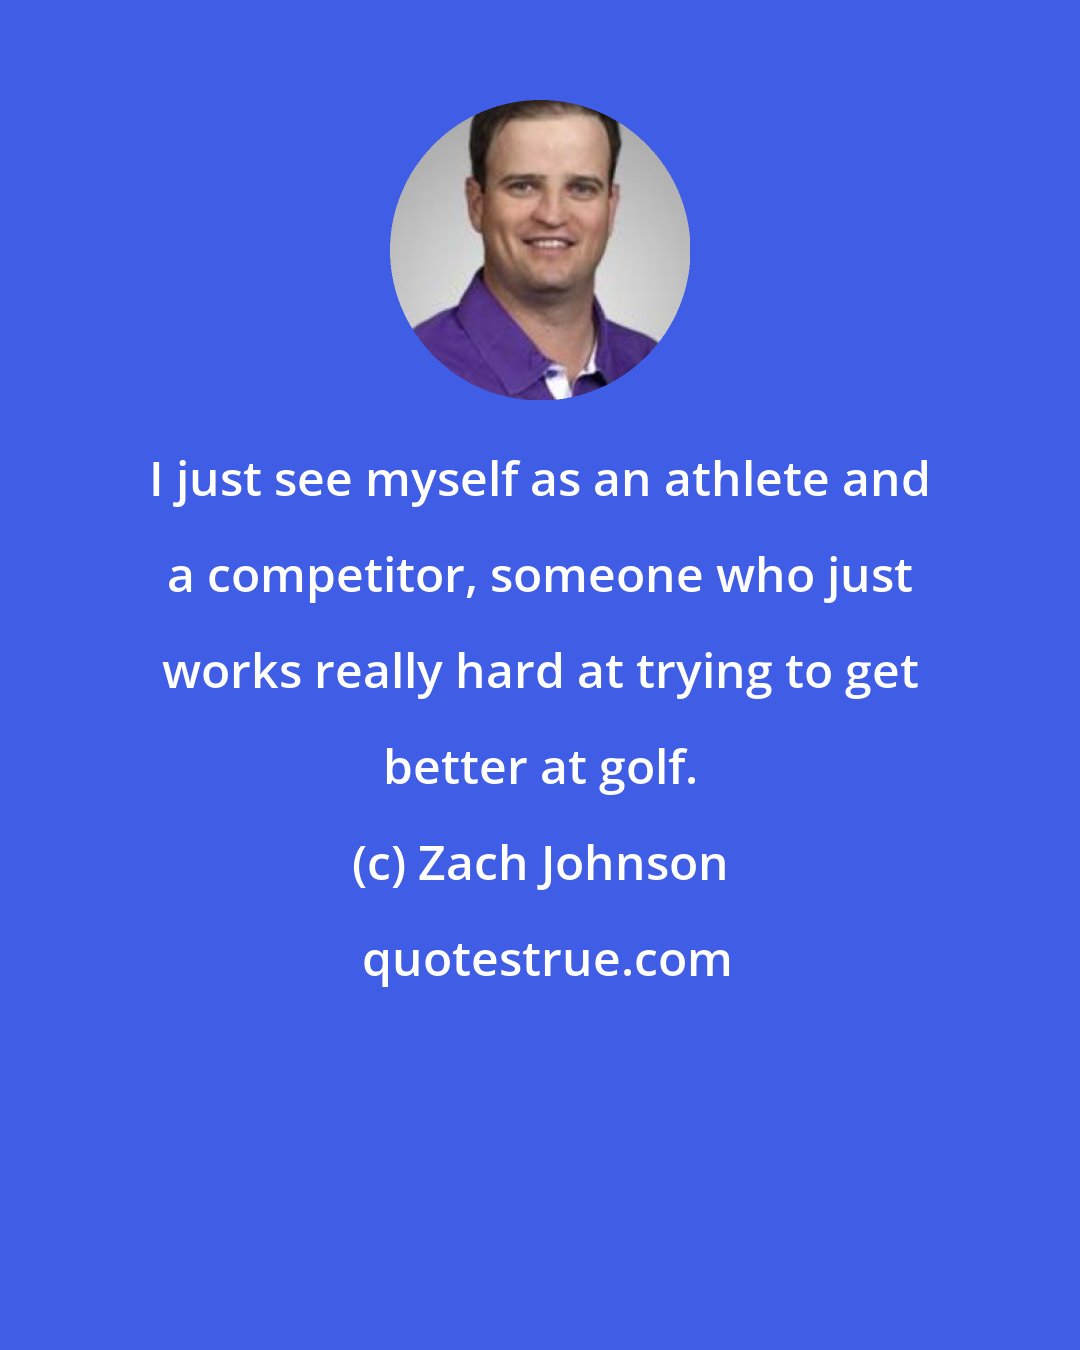 Zach Johnson: I just see myself as an athlete and a competitor, someone who just works really hard at trying to get better at golf.